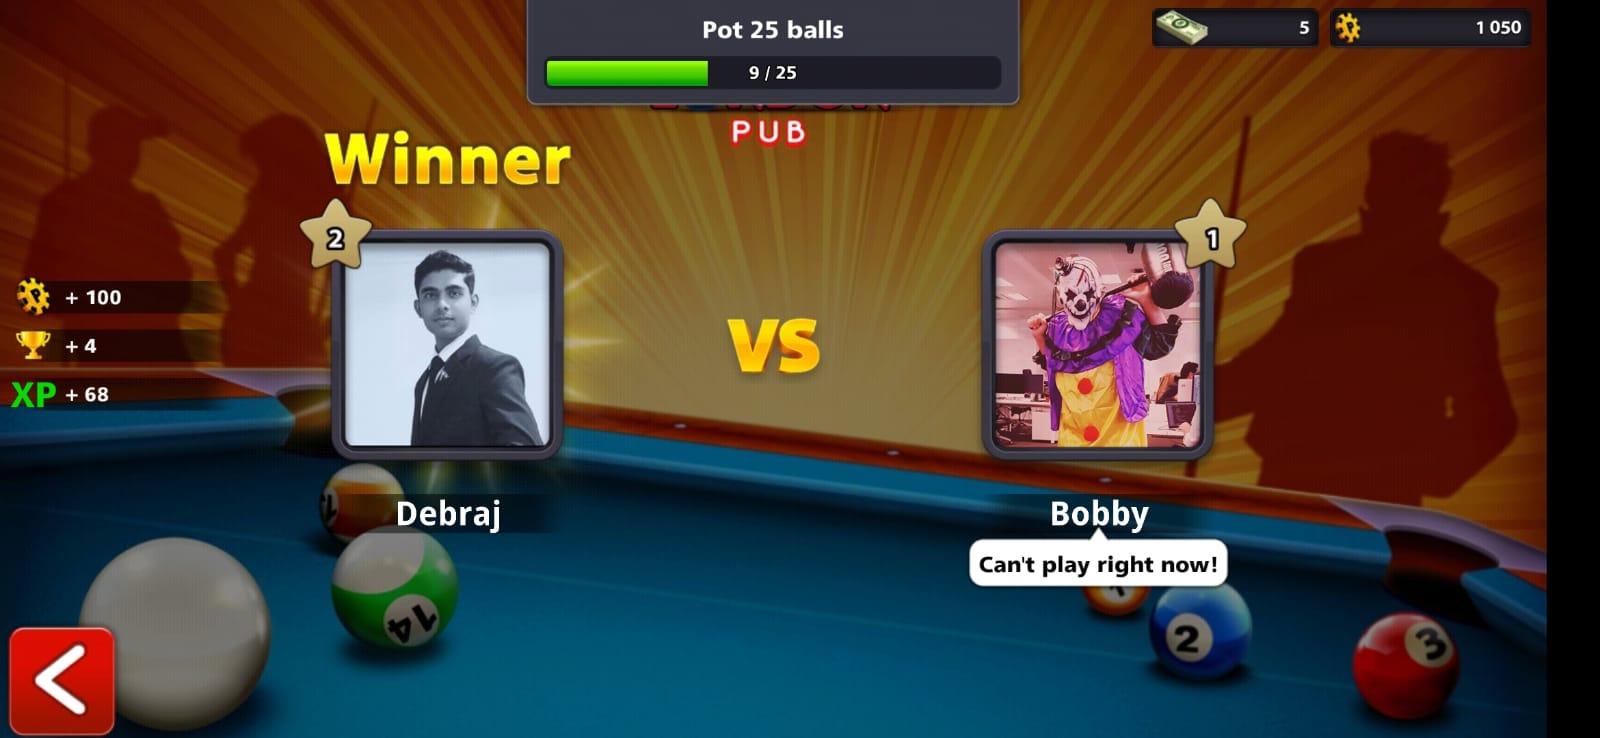 8 ball pool game online